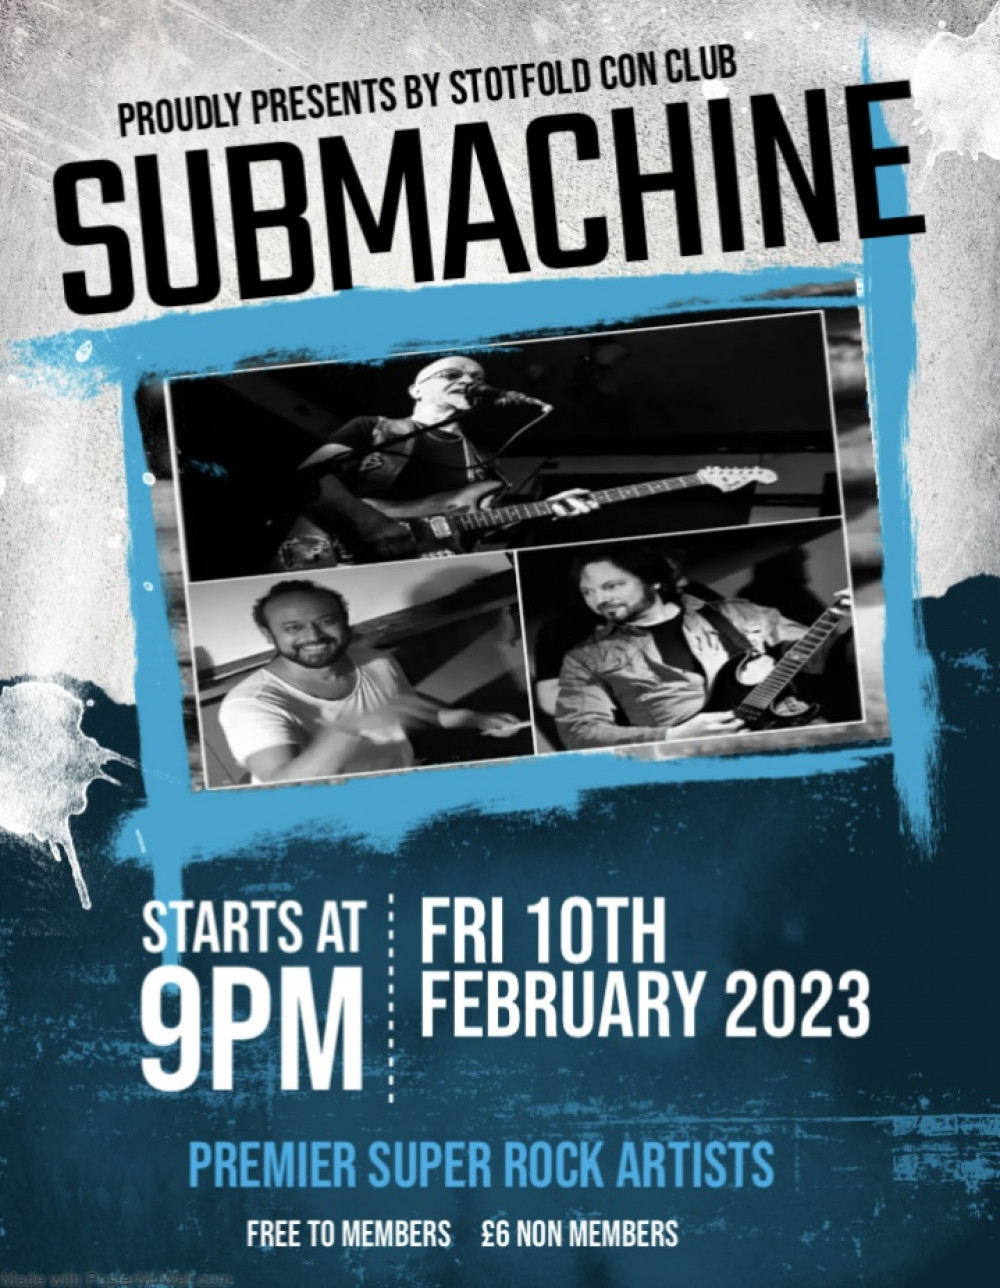 Stotfold Con Club is hosting Submachine featuring Don Maxwell